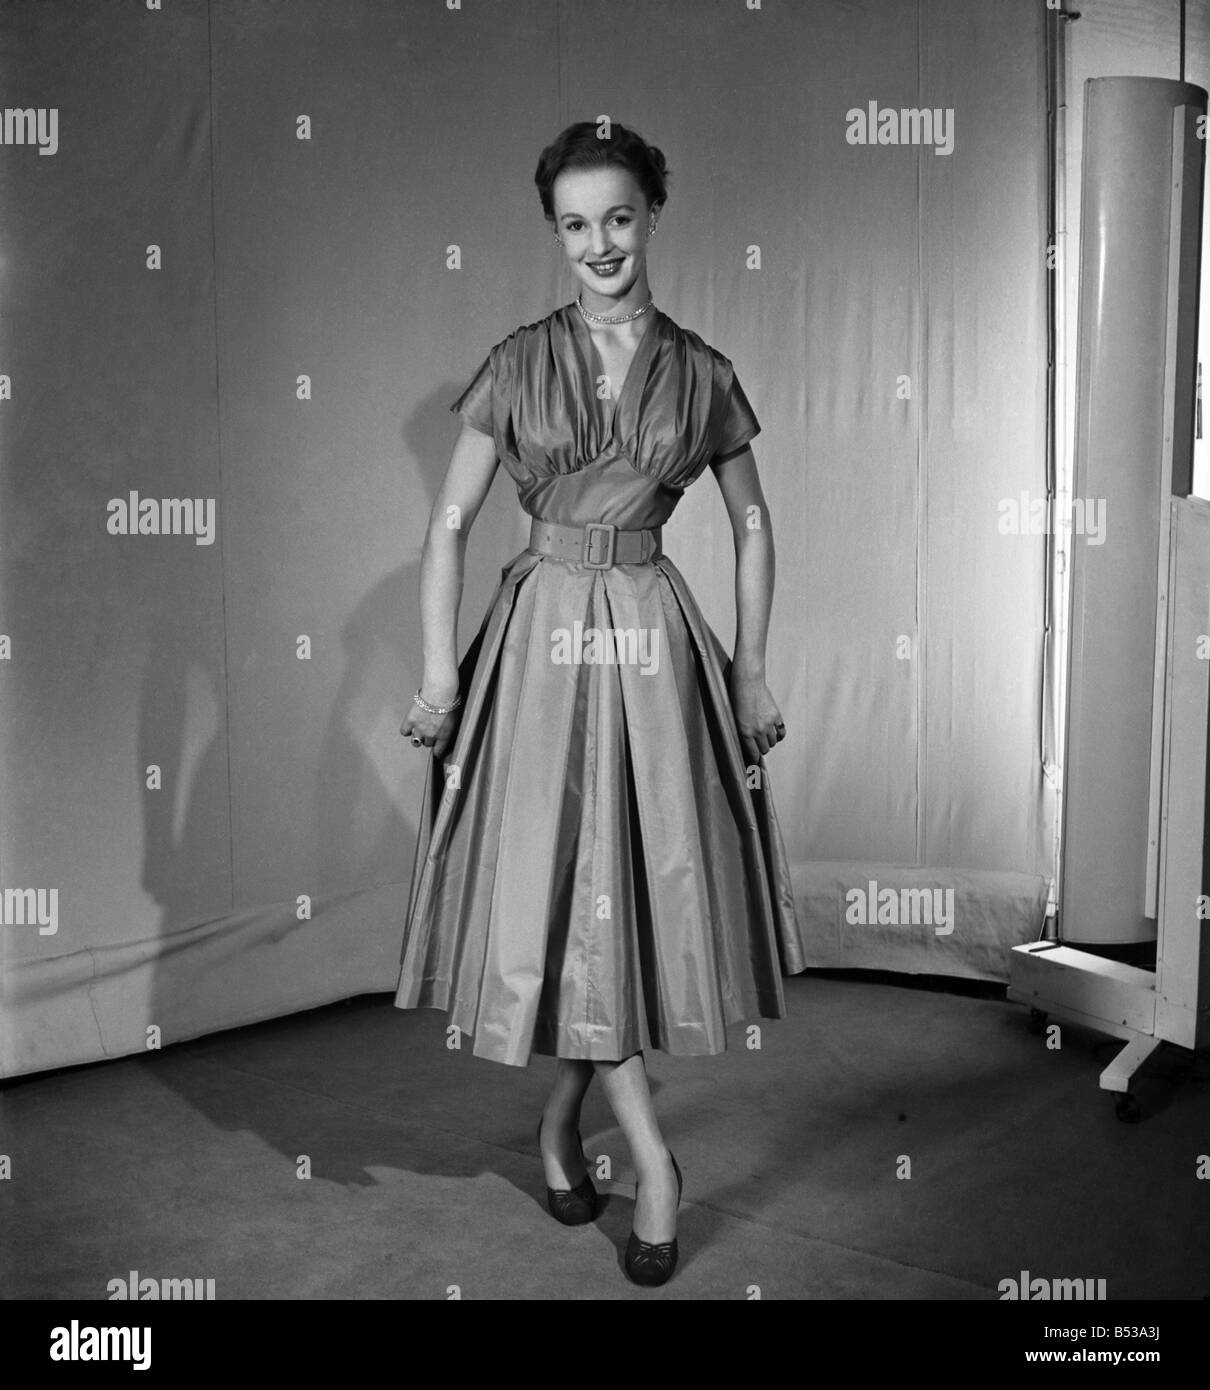 Woman model 1950s Black and White Stock Photos & Images - Alamy